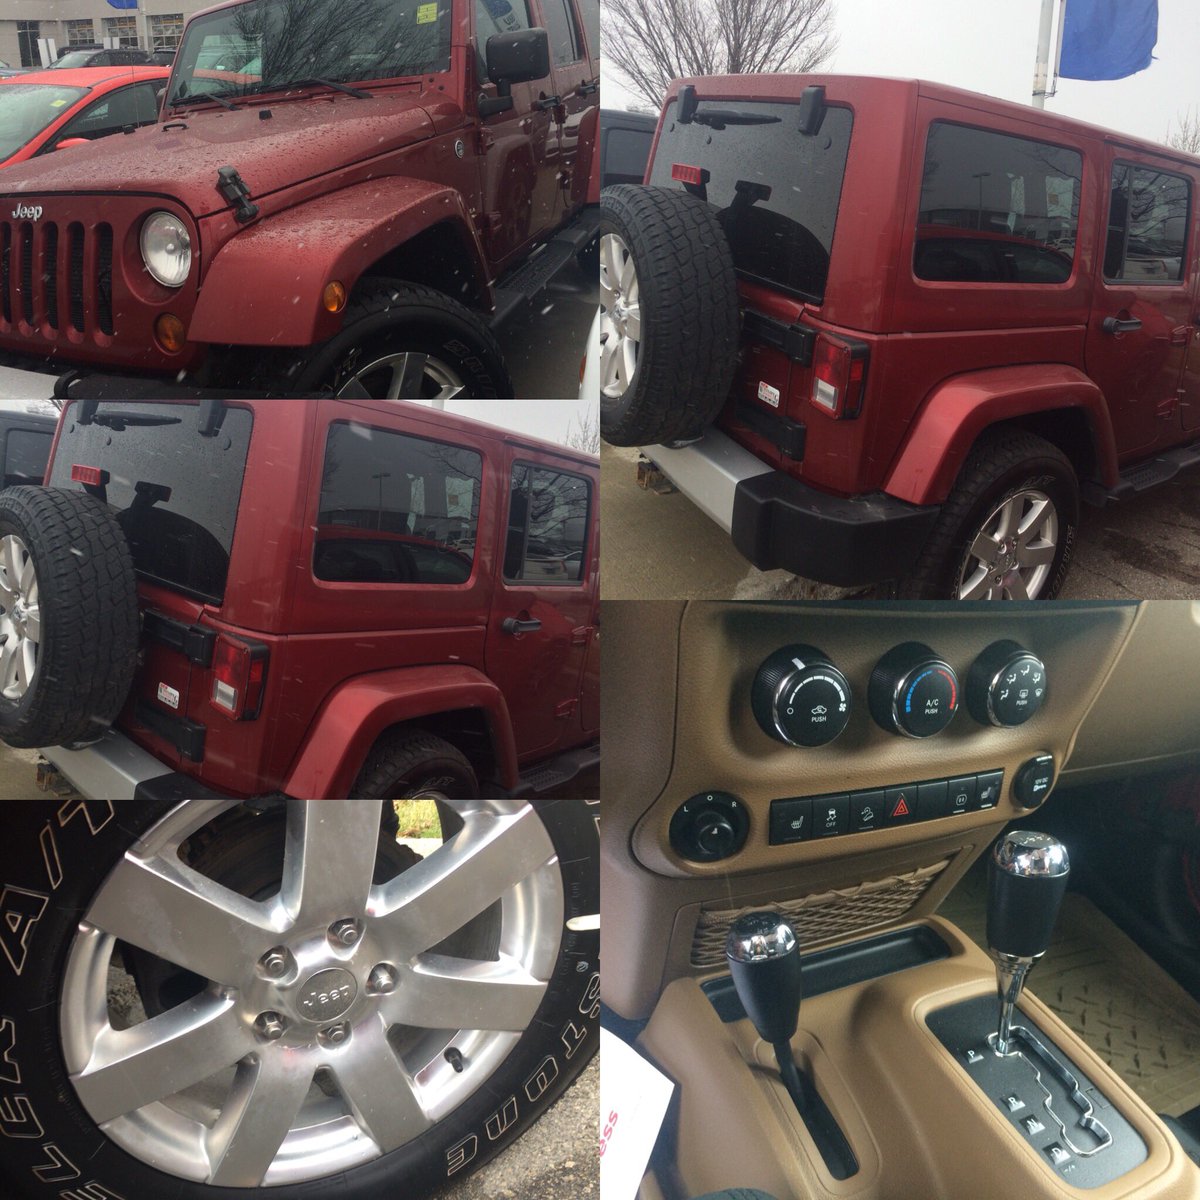 224$ bw 2012 Lainie: 2047744444
 #jeeplife #jeepadventures #WinterIsComing #Manitobawinter #jeepgirl #jeepsysoul